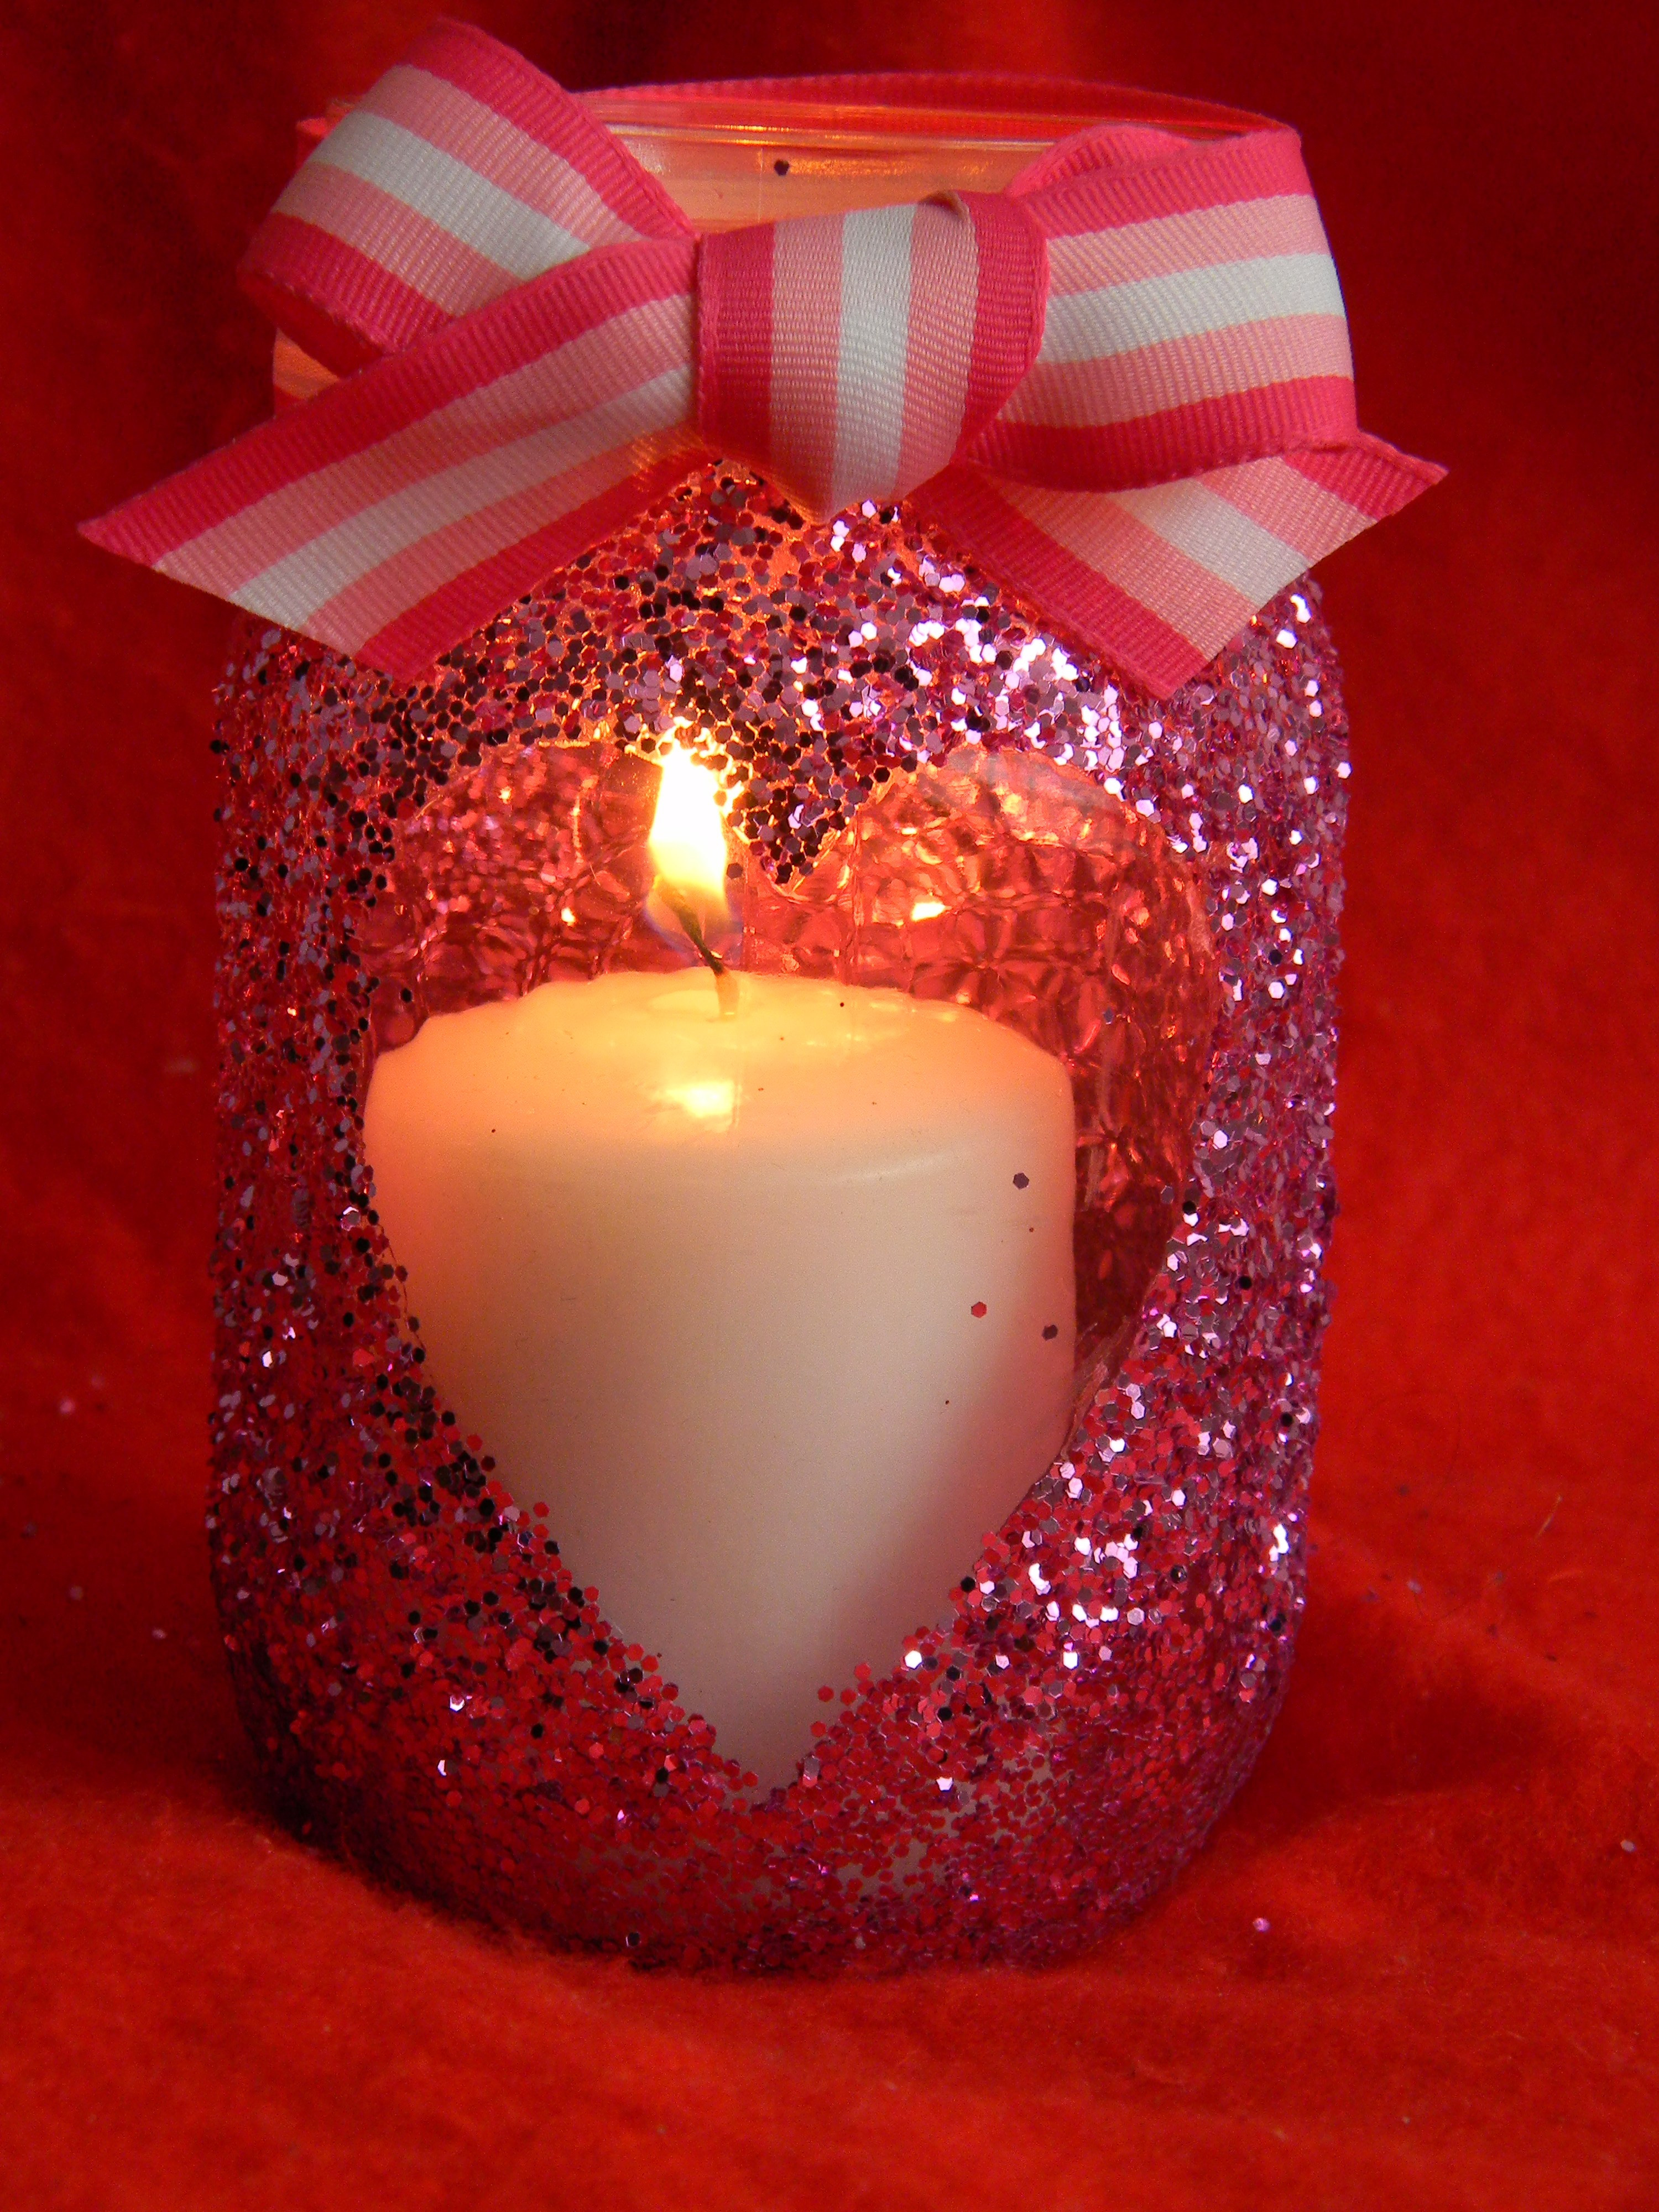 Do It Yourself Valentine Gift Ideas
 DIY Easy Valentine’s Day Gifts